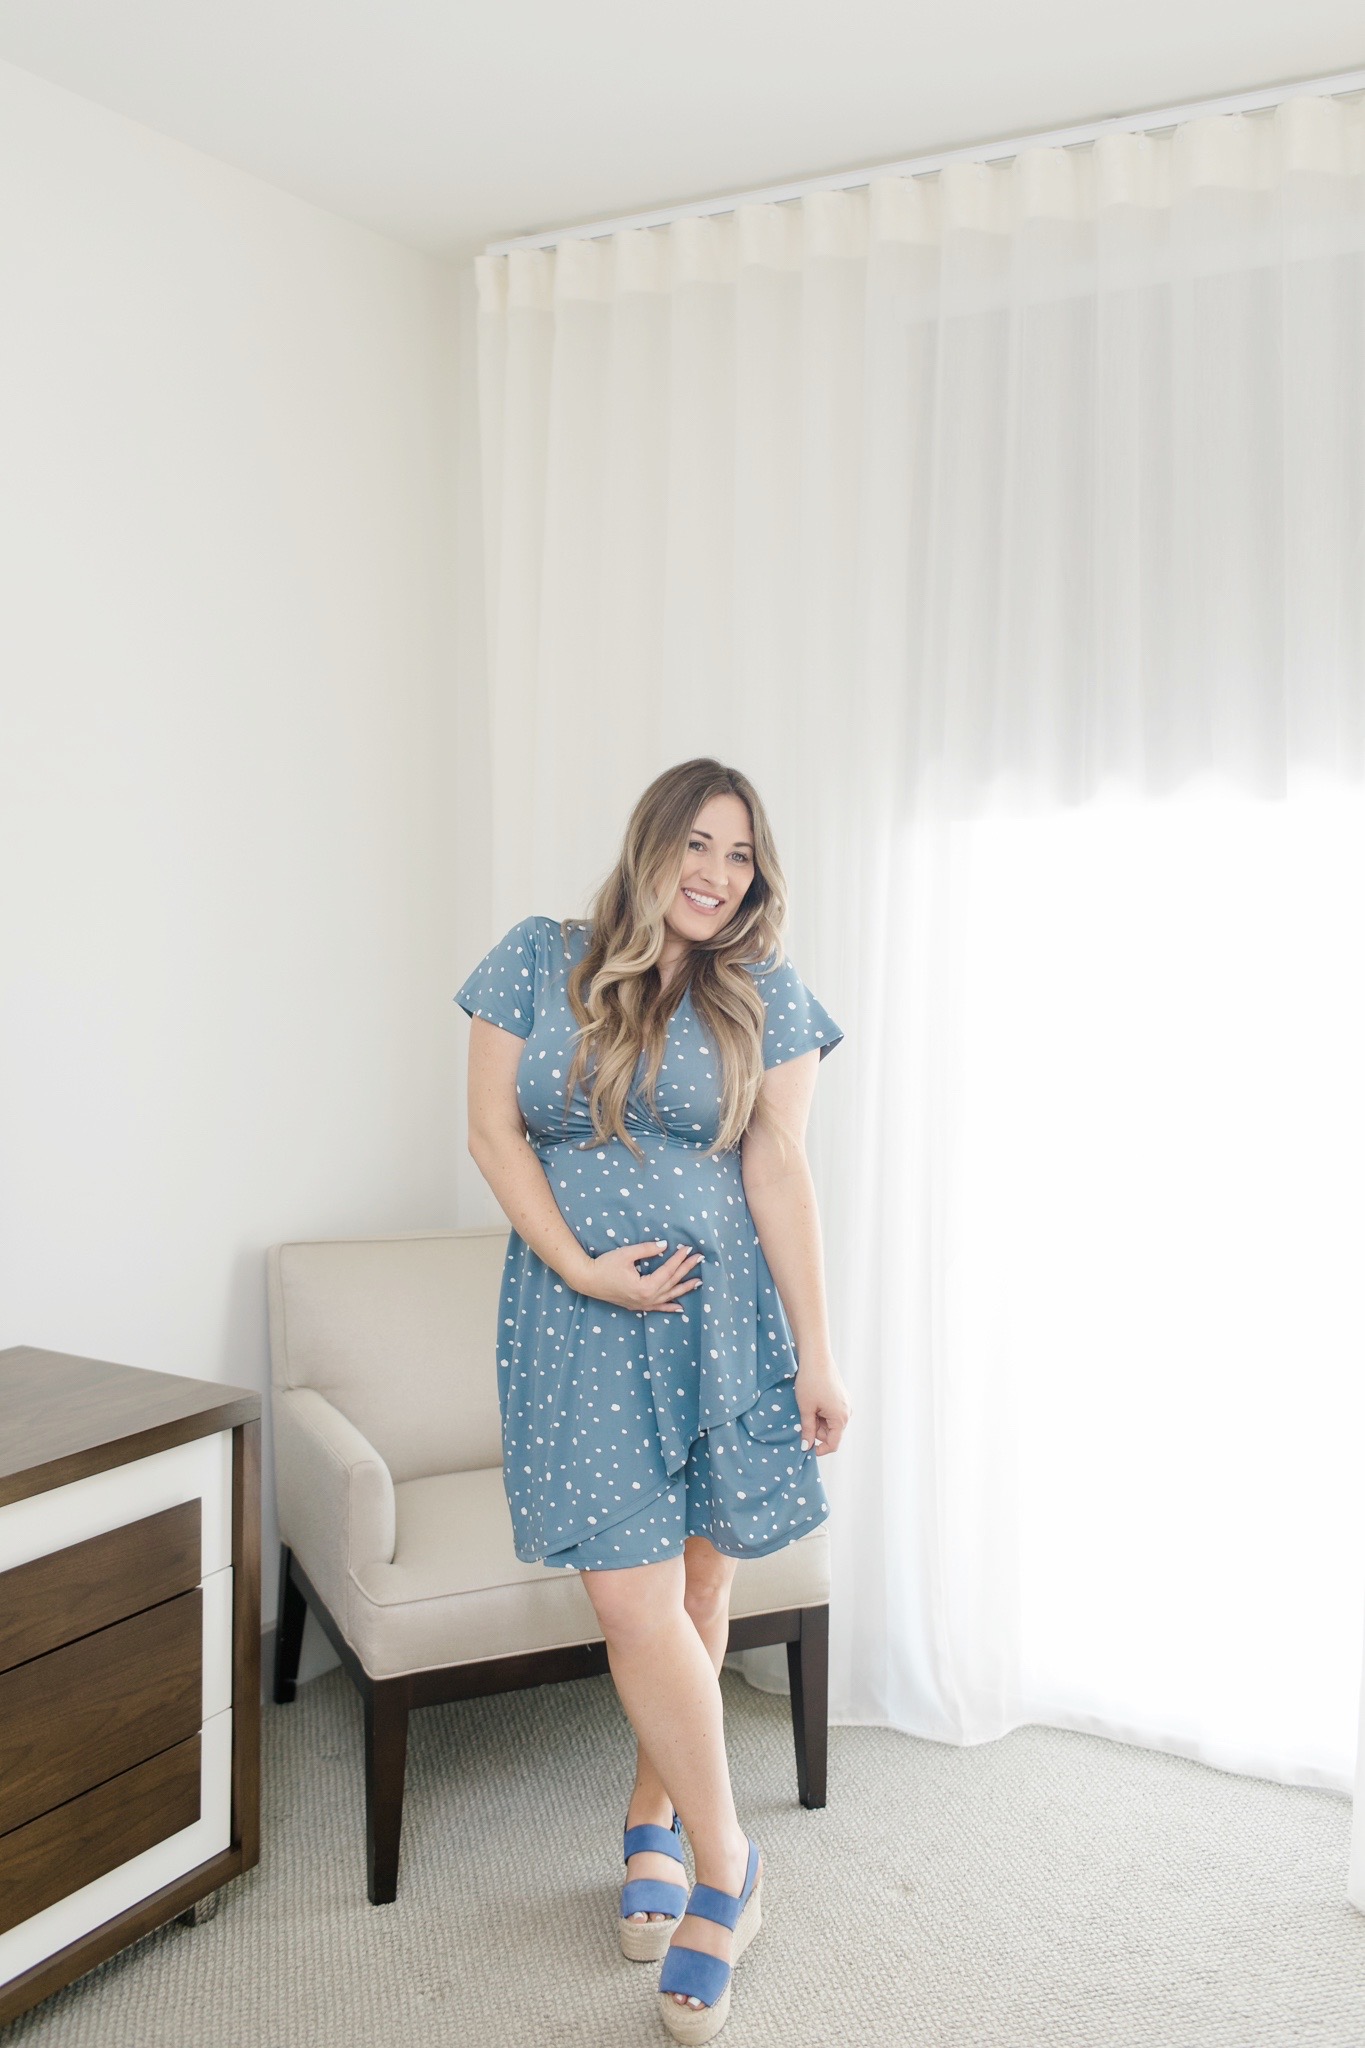 La Belle Bump Maternity Clothing Subscription Box review featured by top Memphis fashion blogger, Walking in High Heels.